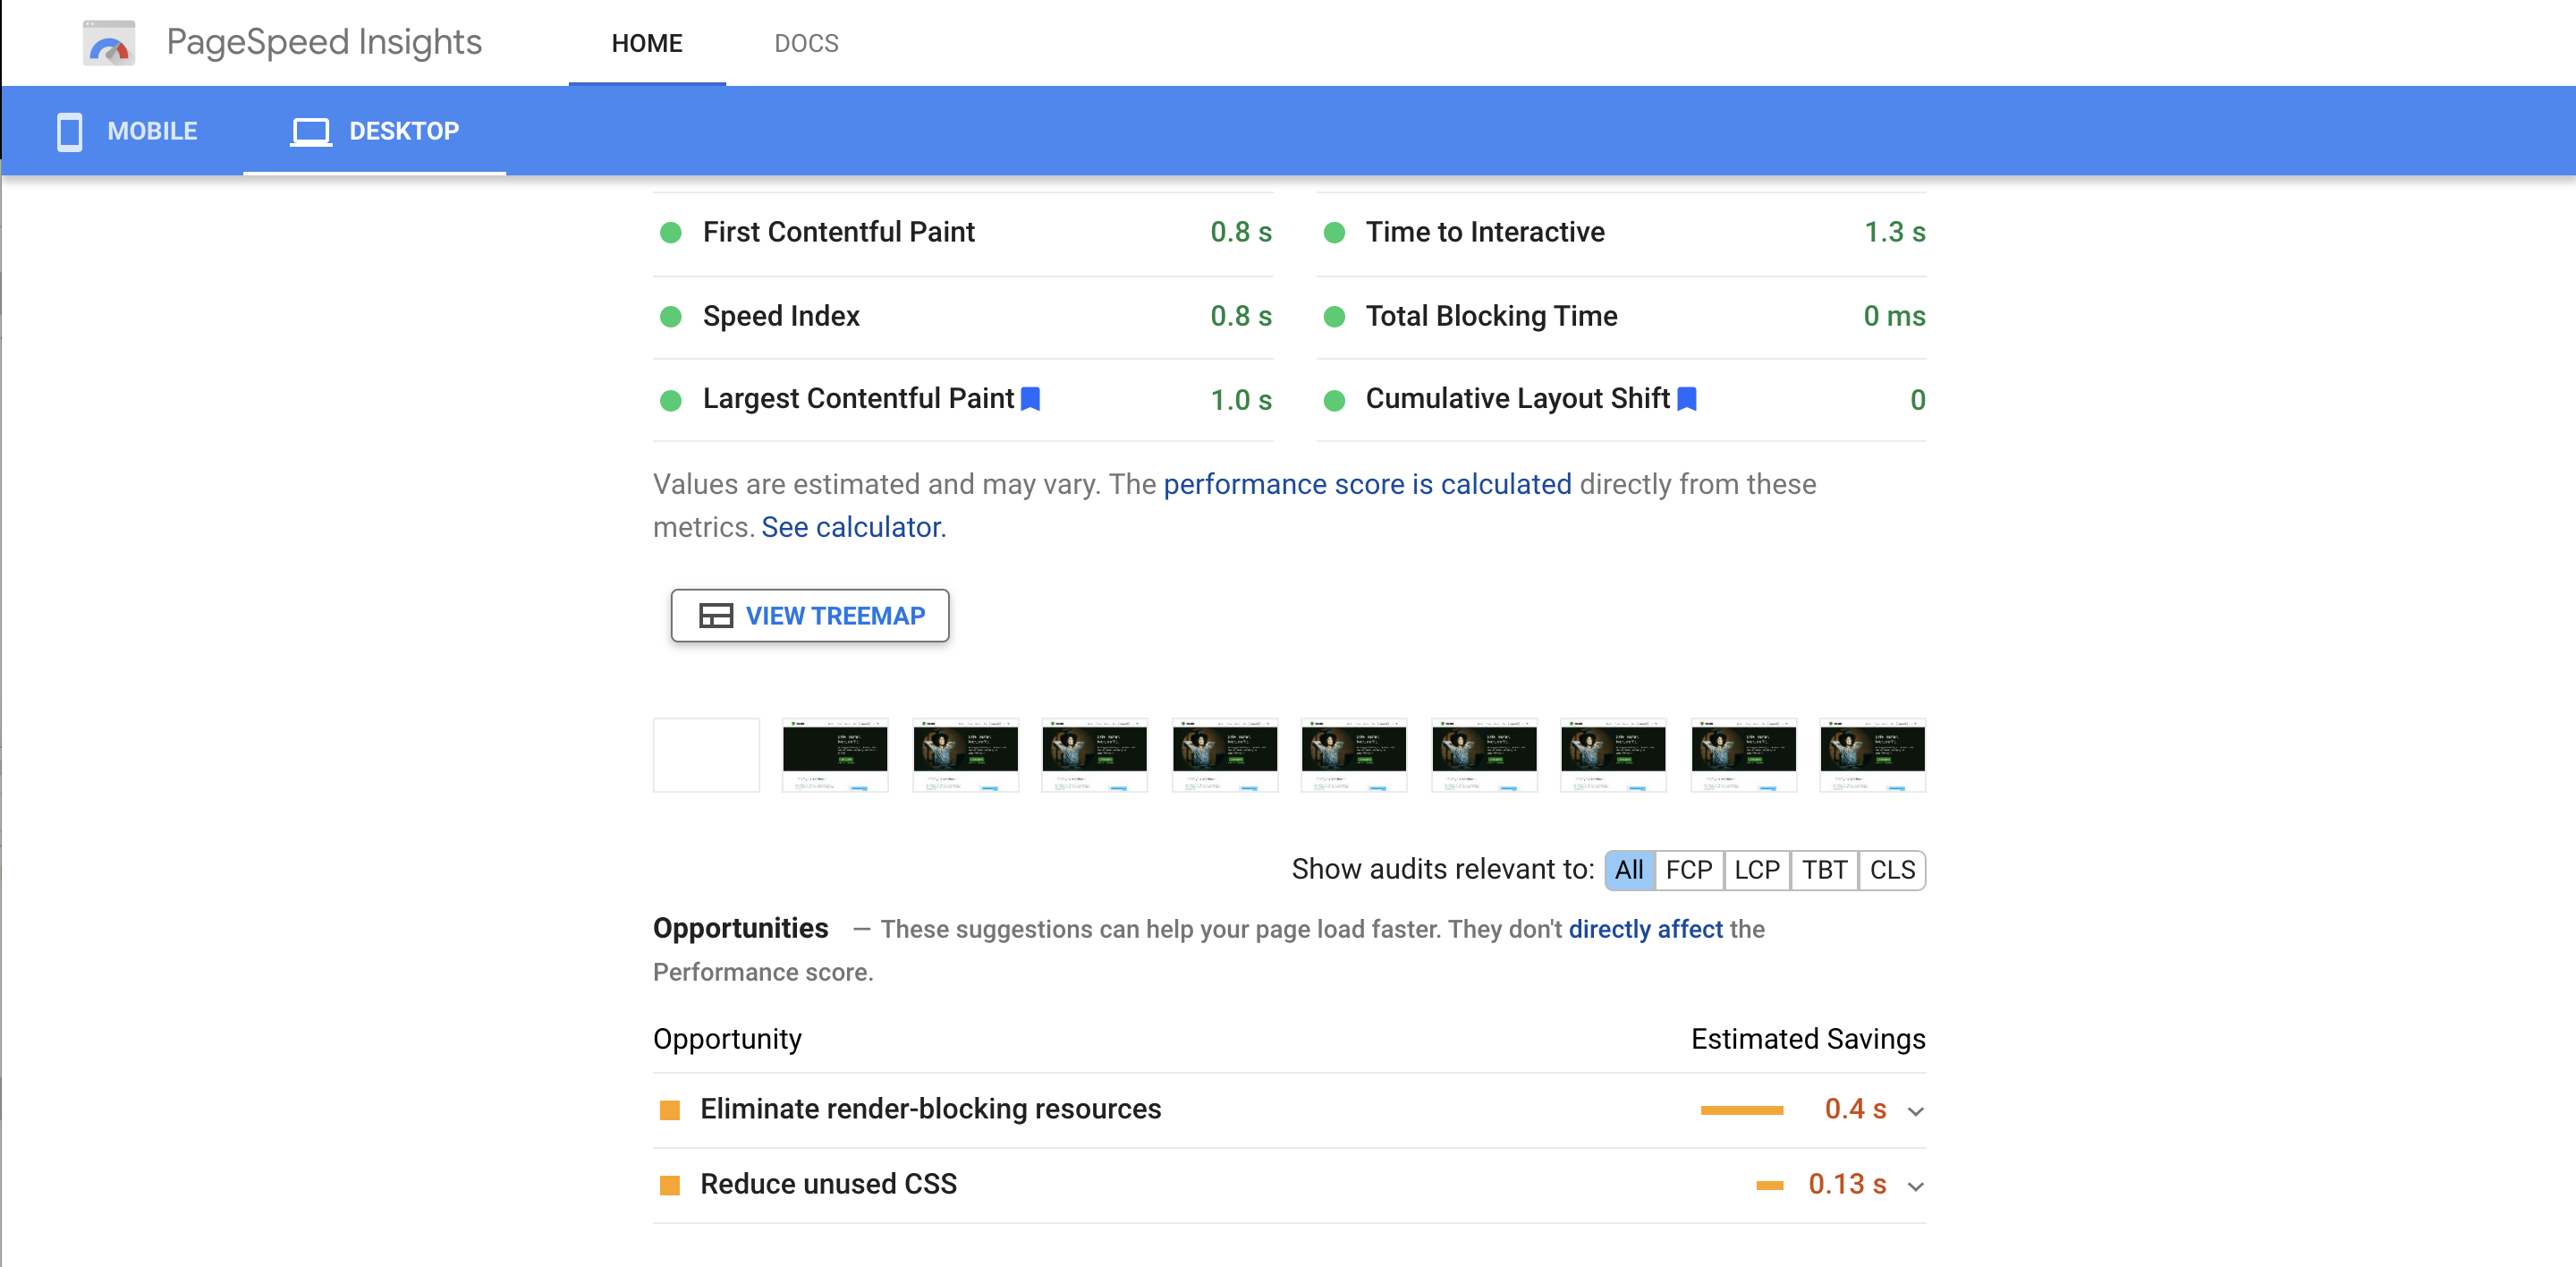 Opportunities section on Google PageSpeed Insights for Jetpack.com